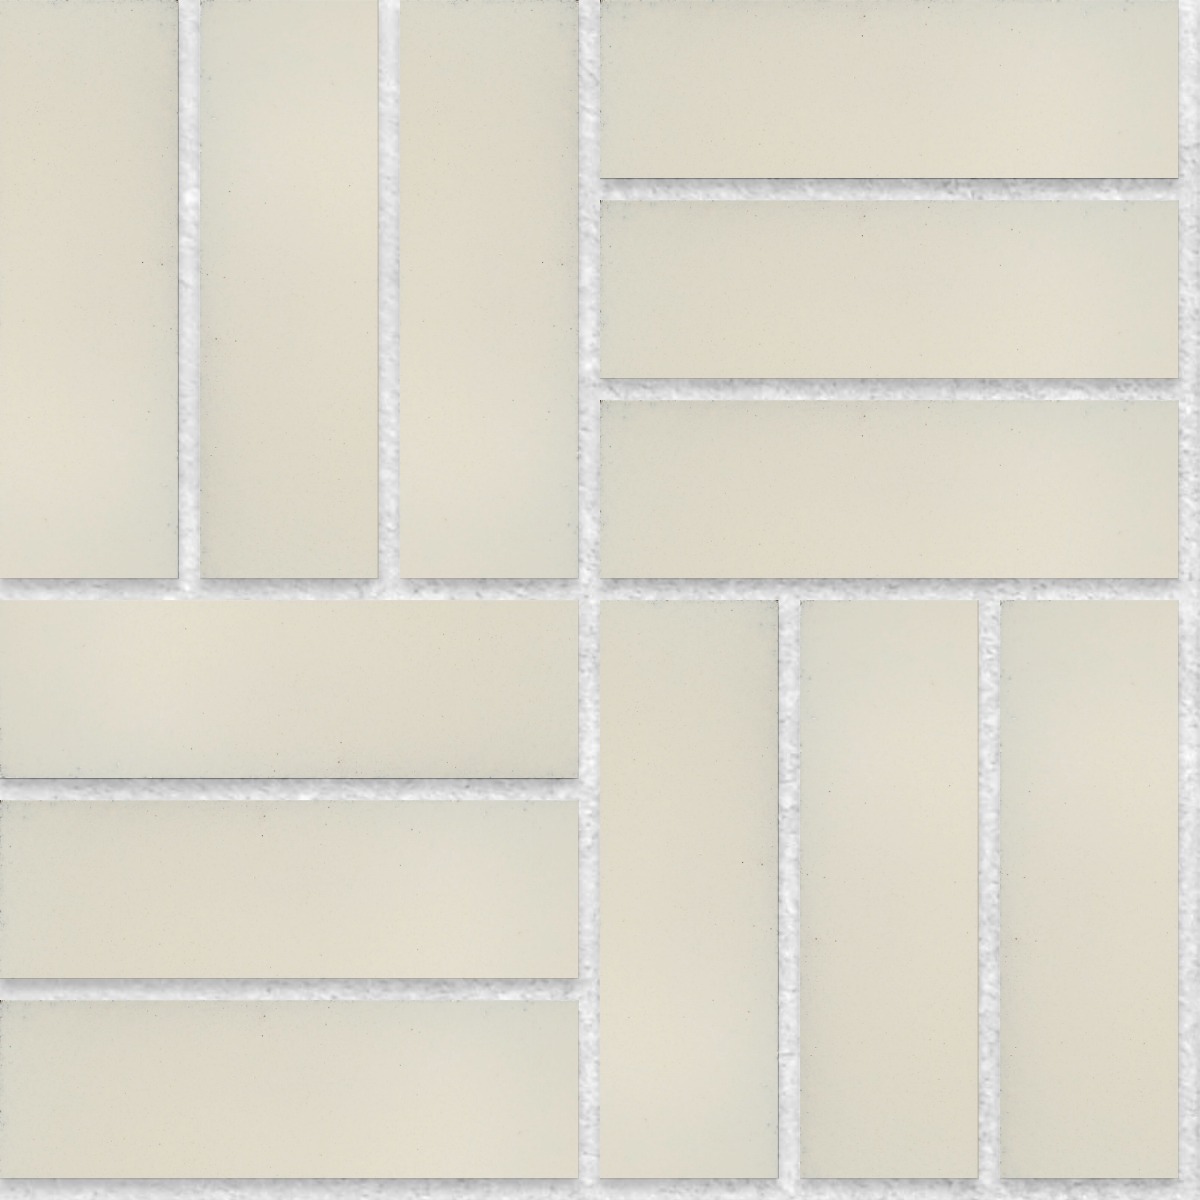 A seamless brick texture with eco-glazed brick slips magnolia units arranged in a Basketweave pattern